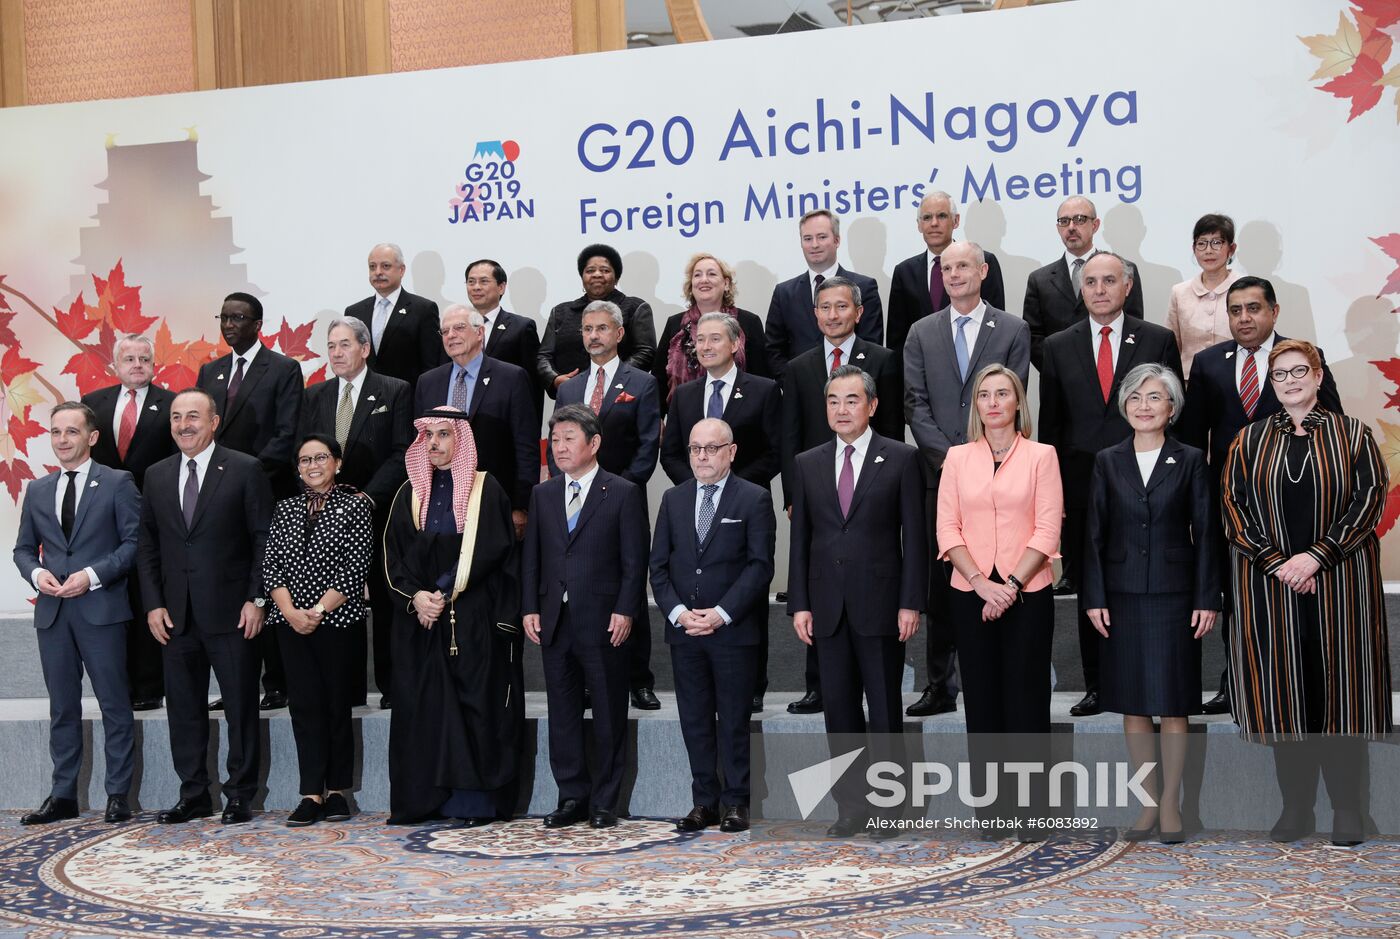 Japan G20 Foreign Ministers' Meeting 